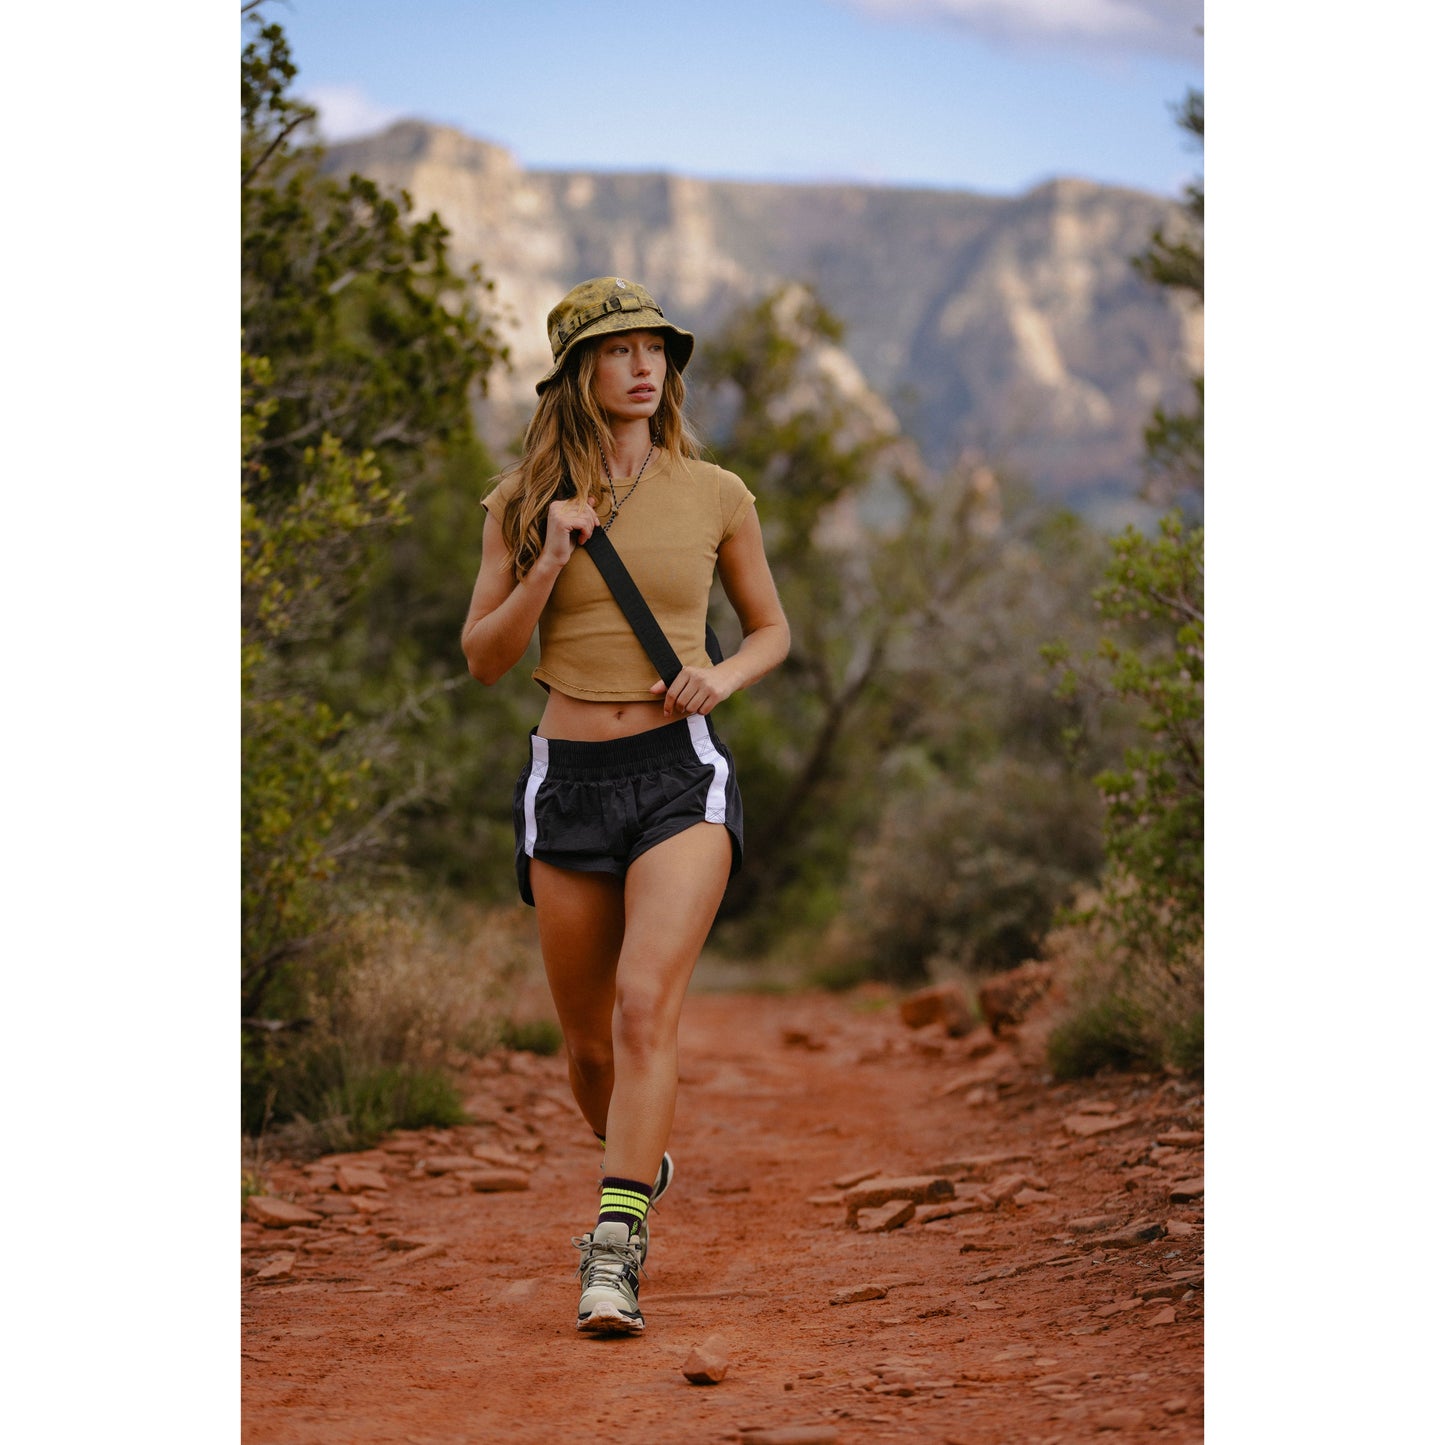 A woman in Free People Movement's Trail Angel Shorts in Black Combo and hiking gear walks on a dirt trail with mountains in the background.